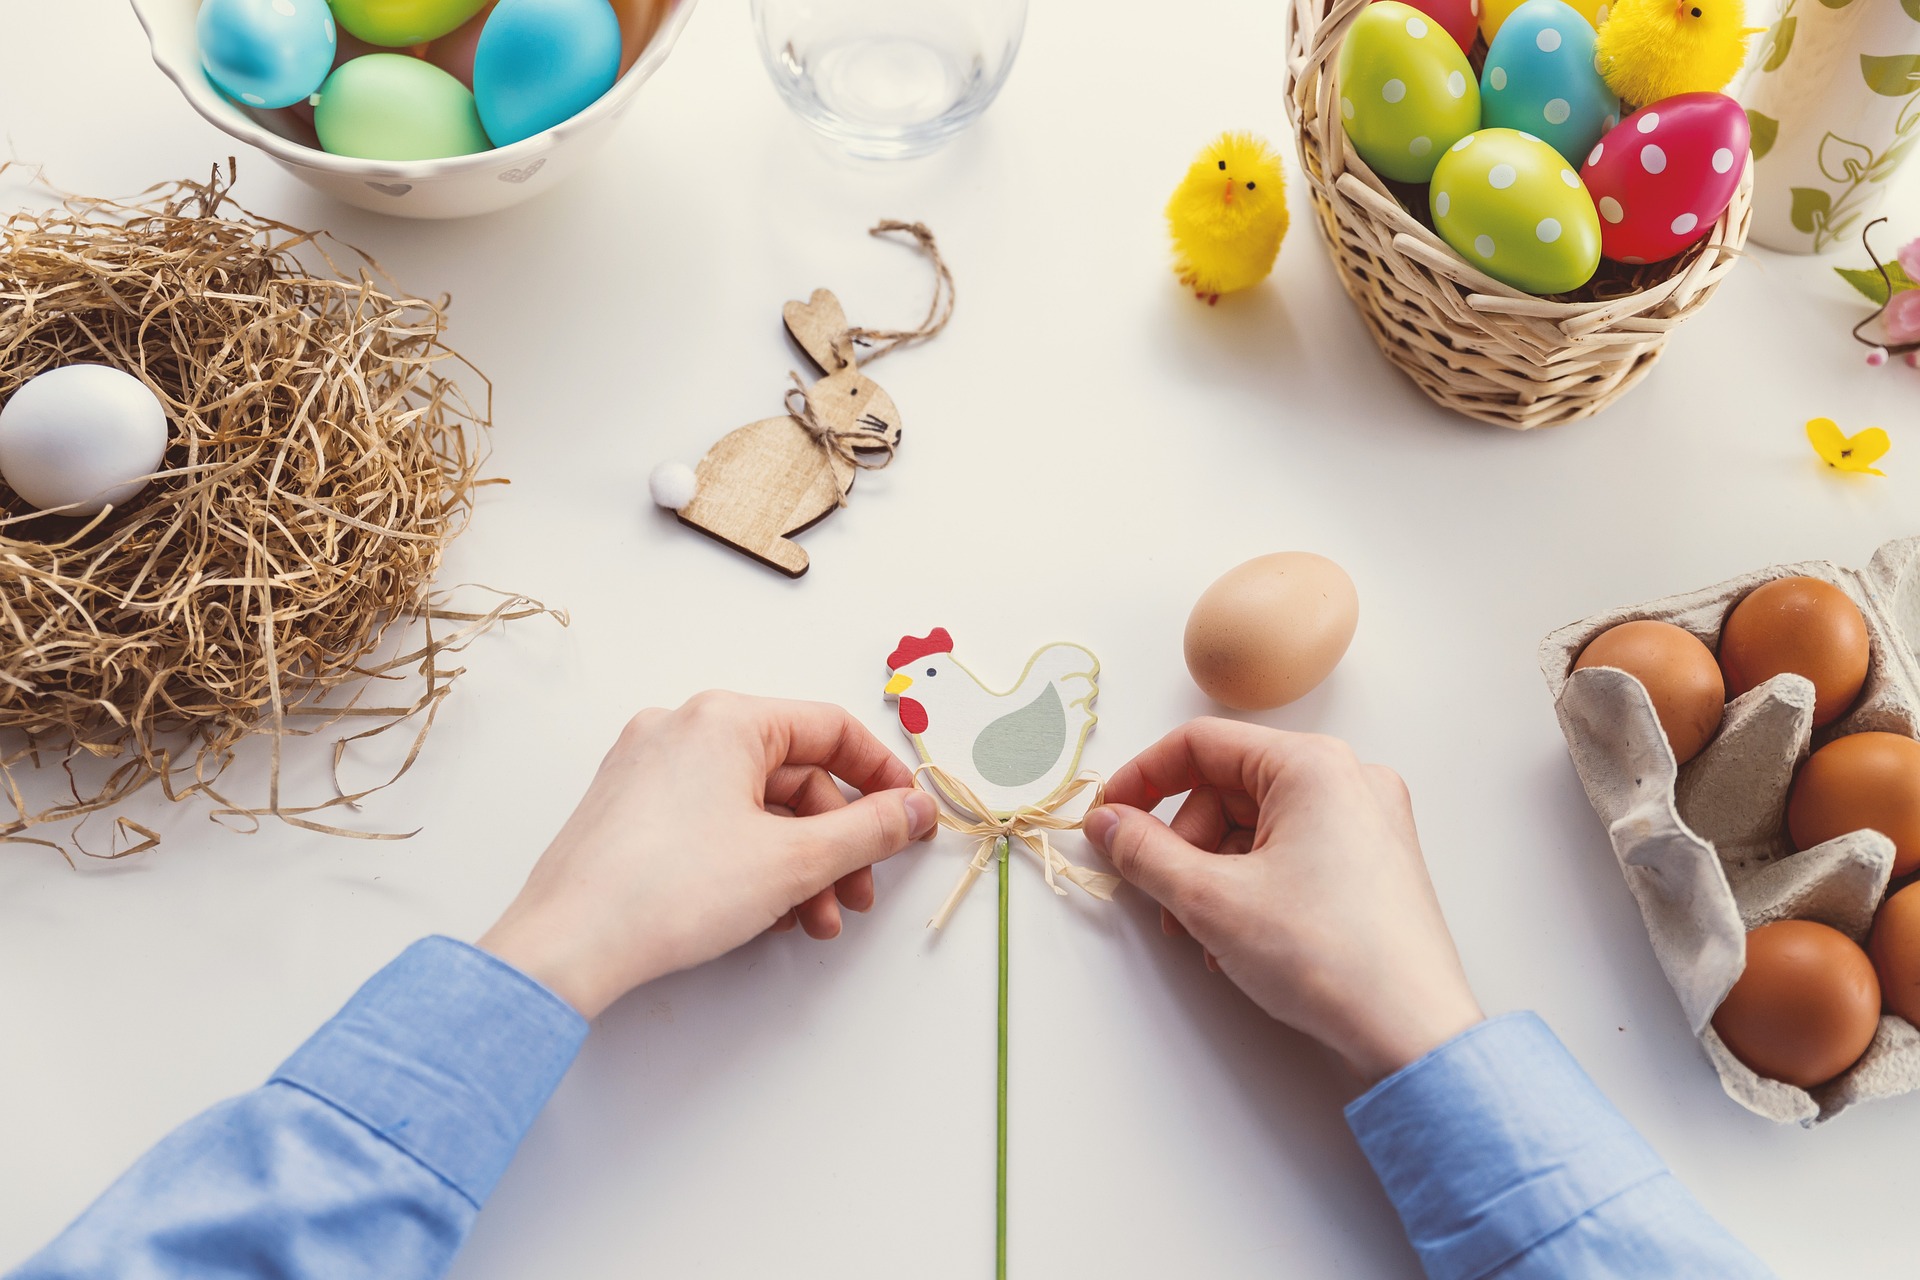 Course Image for 8040C2239 Family Fun:: Easter Crafts (Workshop)